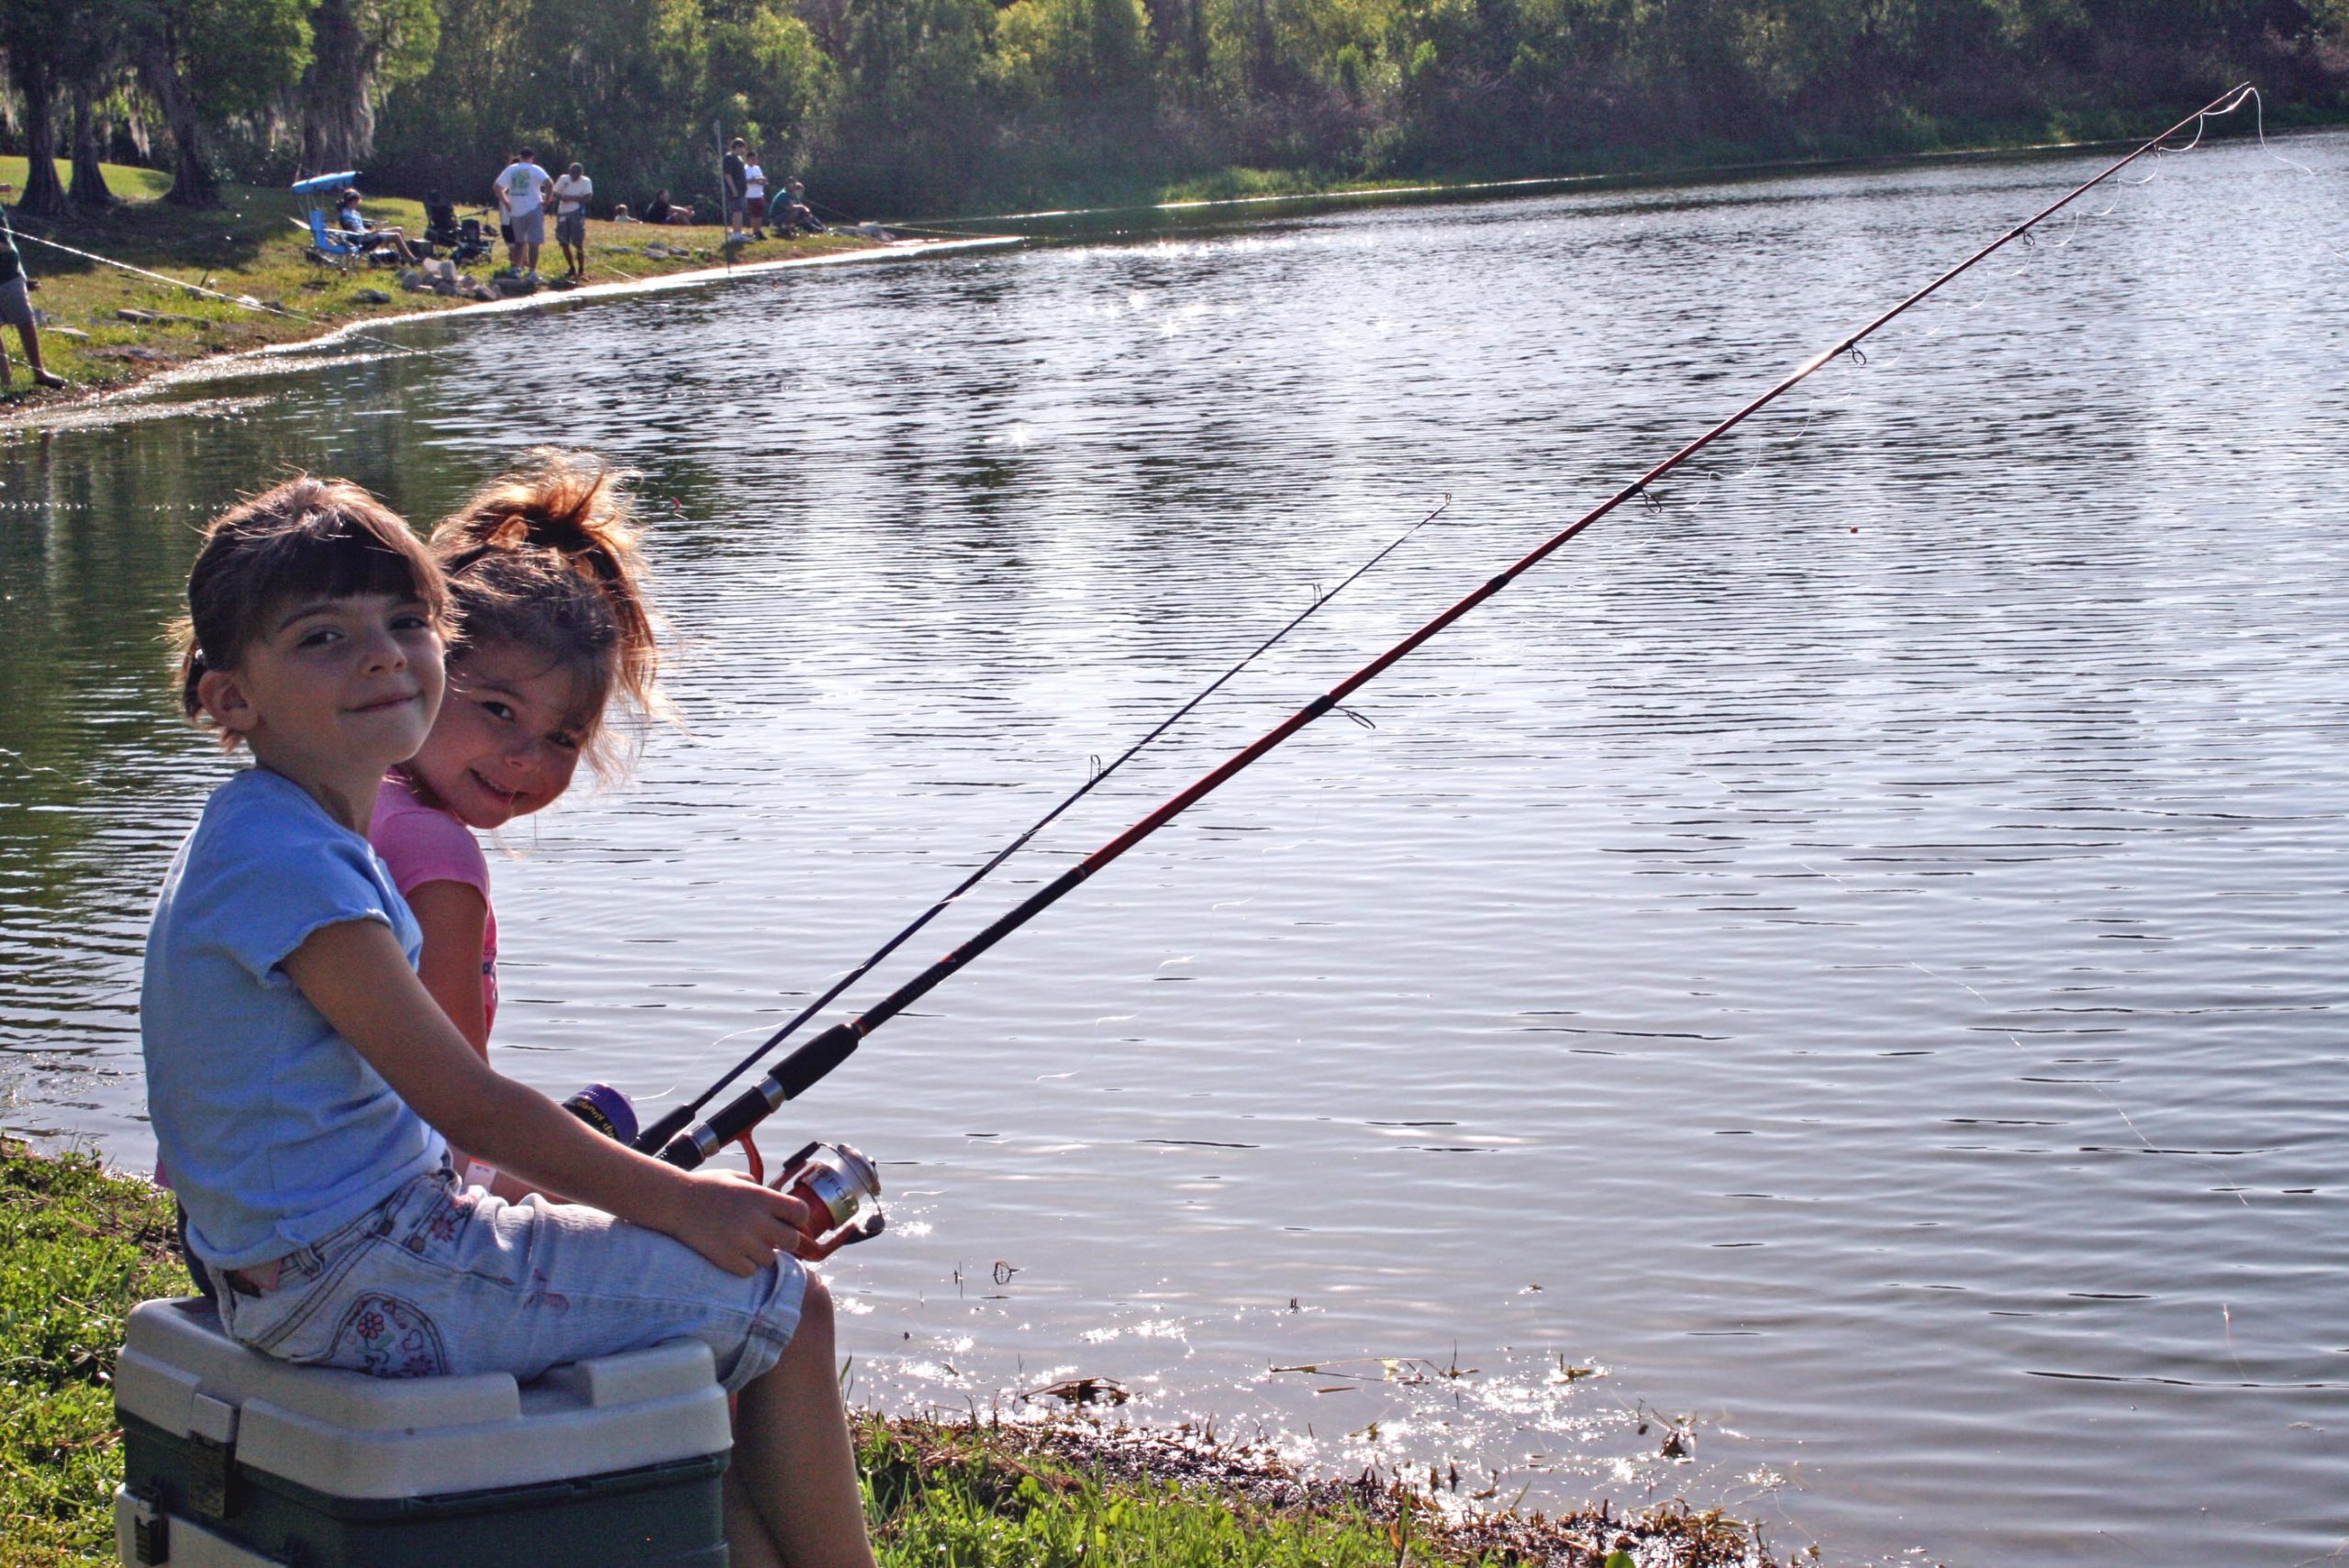 Recreational Fishing and Keep Fish Wet – Fish, Fishing, and Conservation